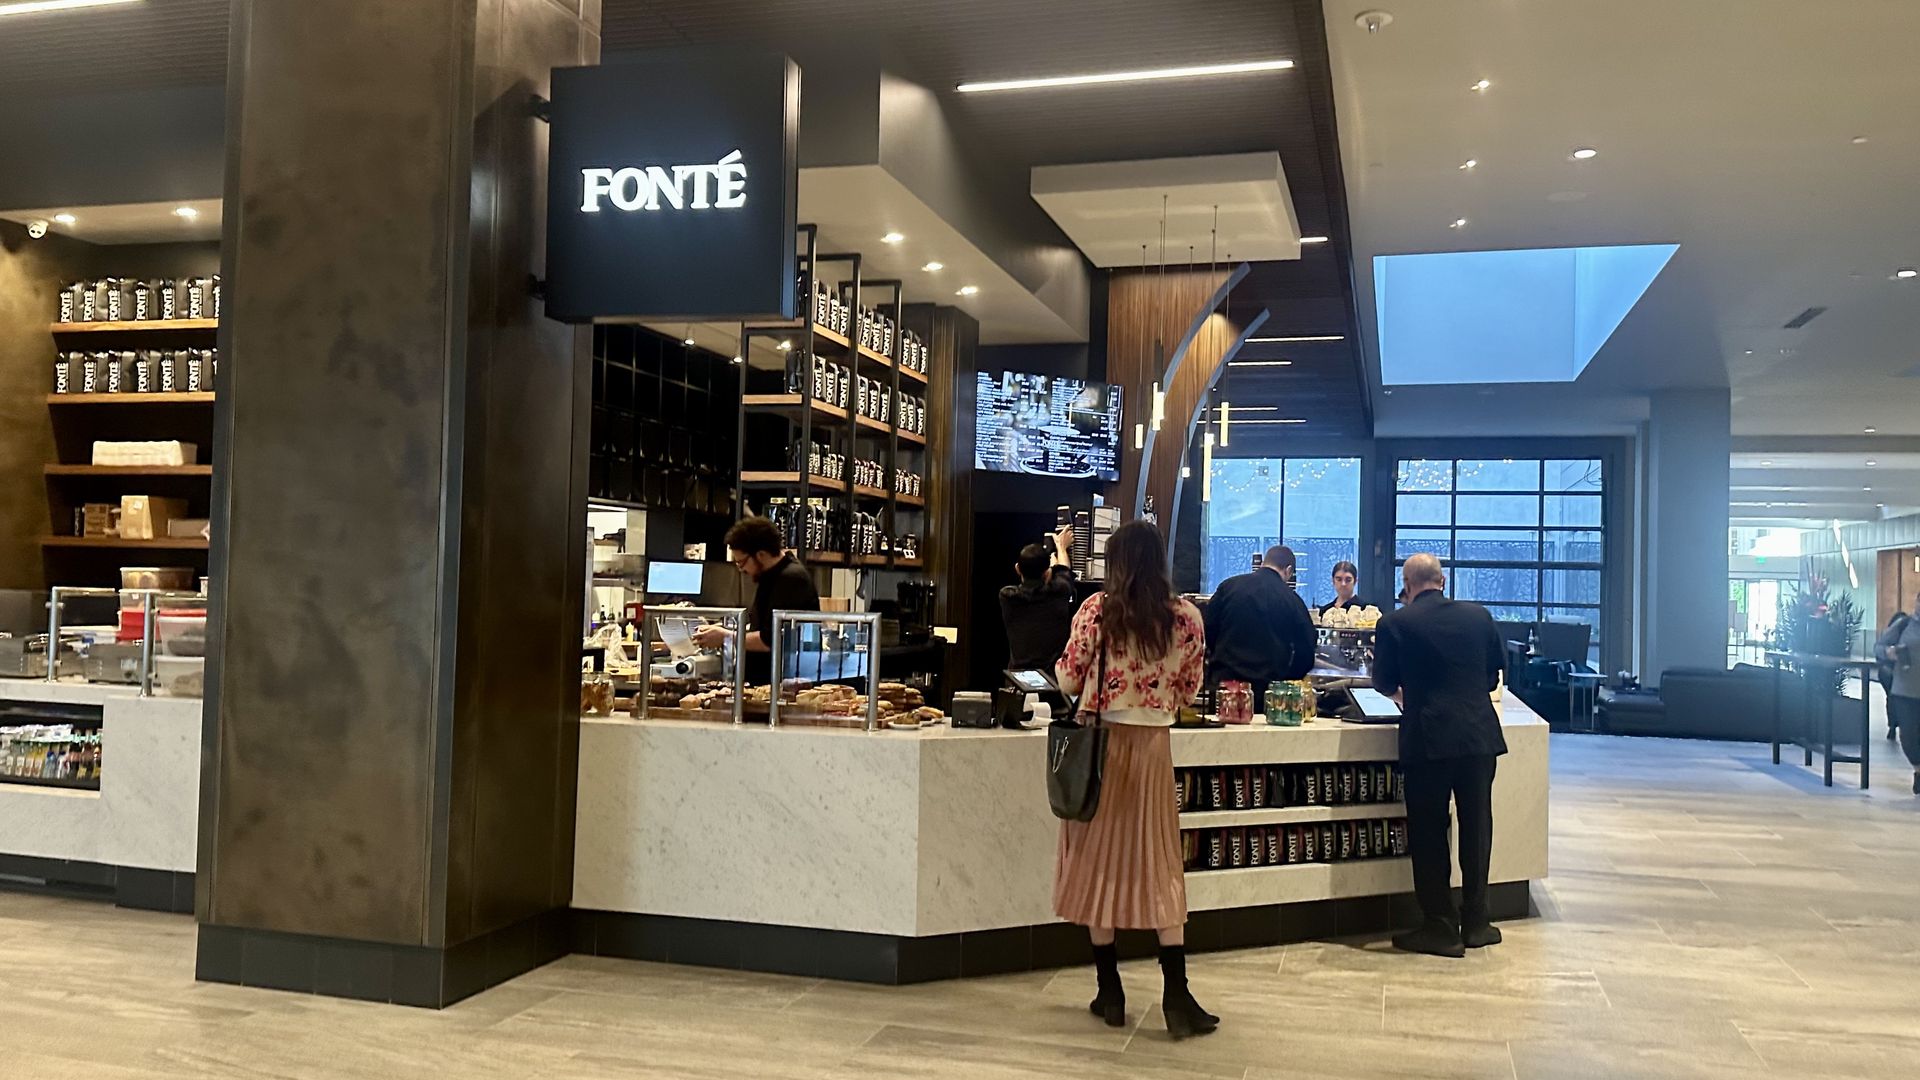 Two people stand near a light colored coffee counter with dark wood accents behind and a sign that says "Fonte"